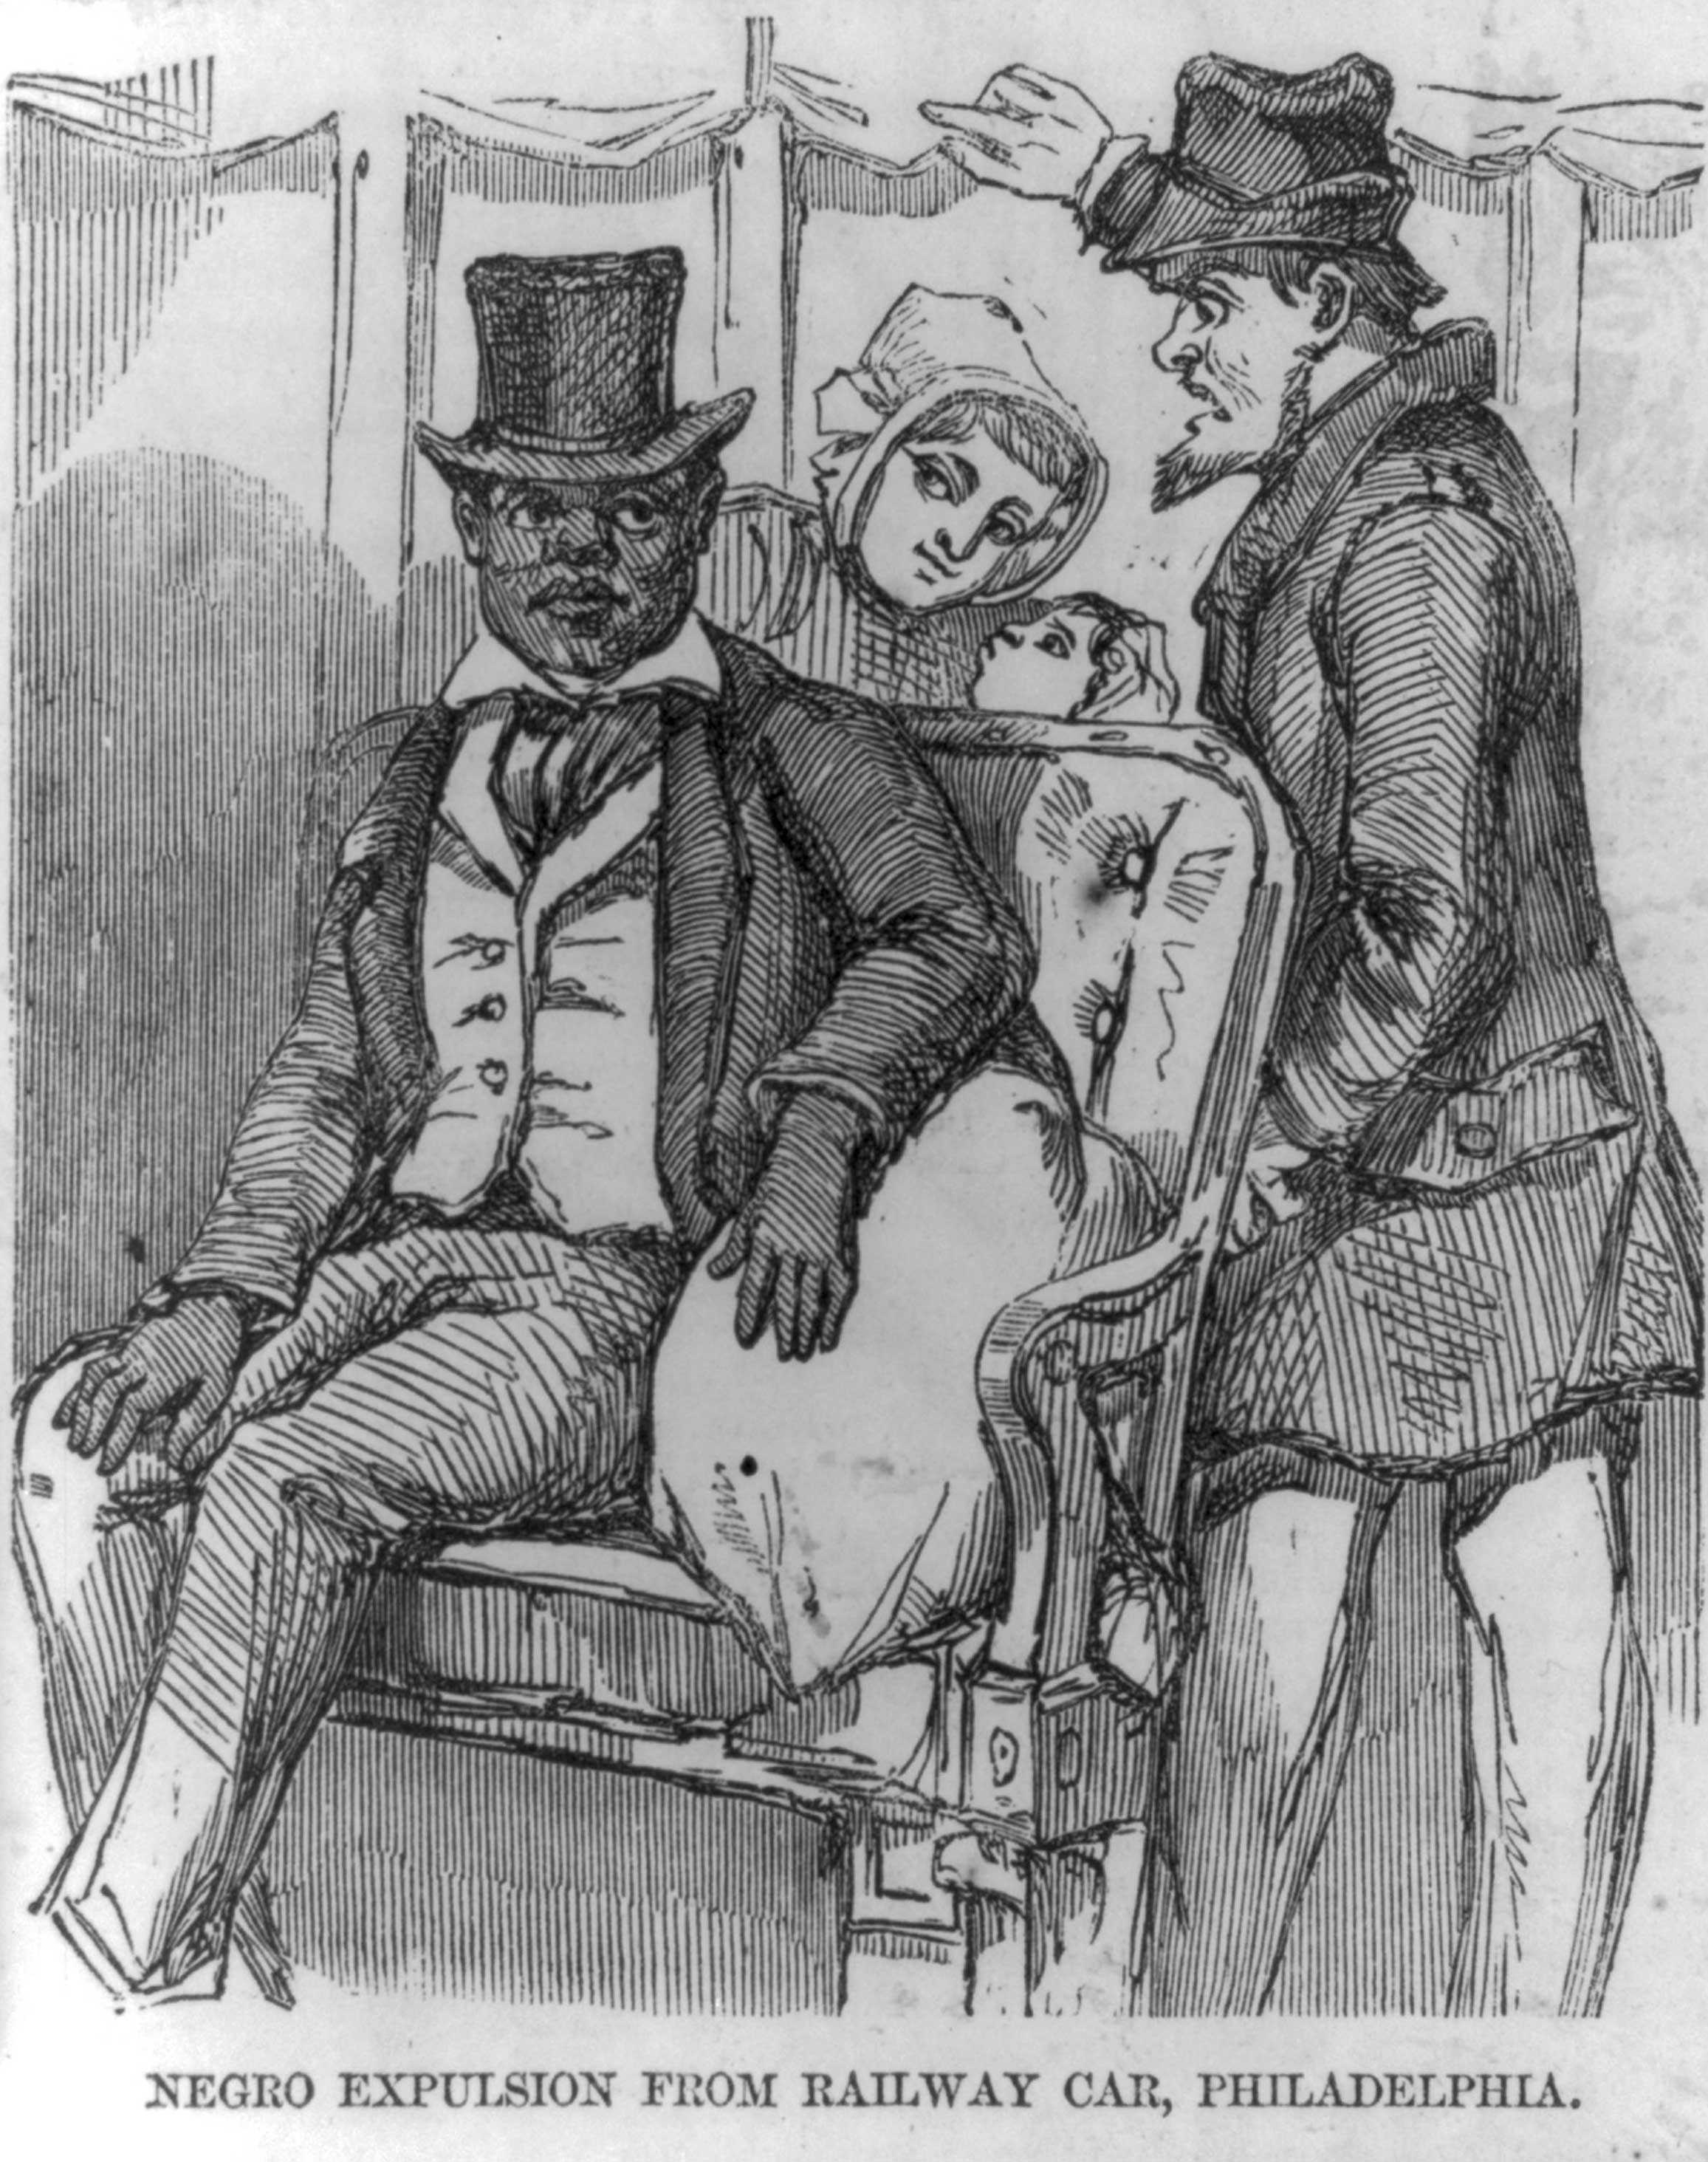 An cartoon drawing of an African American sitting down in a railway car, while a white family behind him, staring.